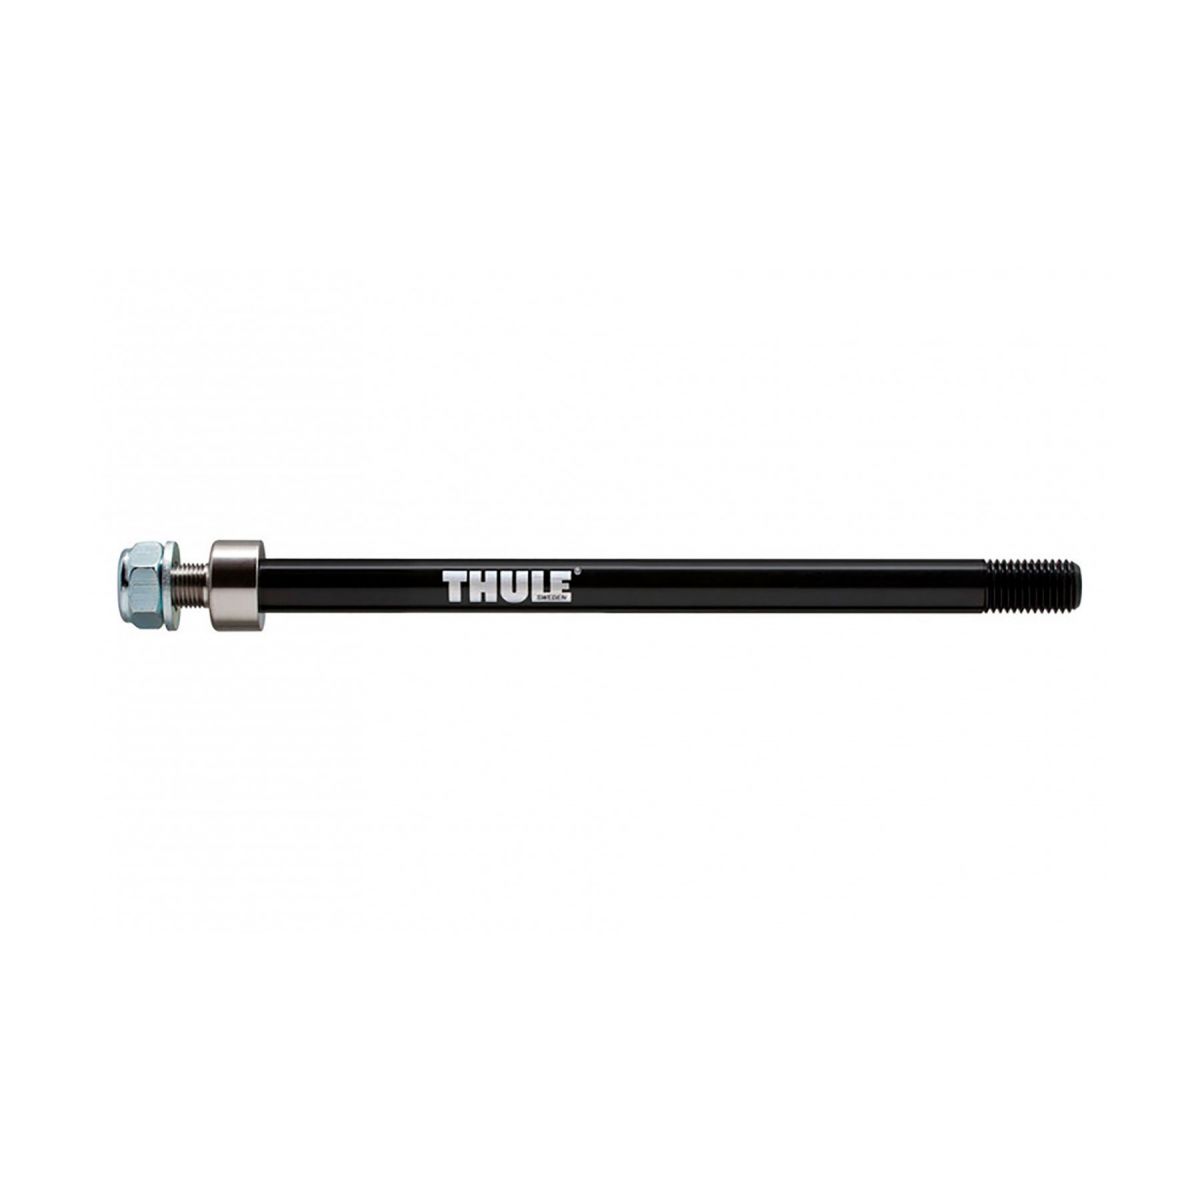 Eje Thule Thru Syntace 162/174mm (M12X1.0)